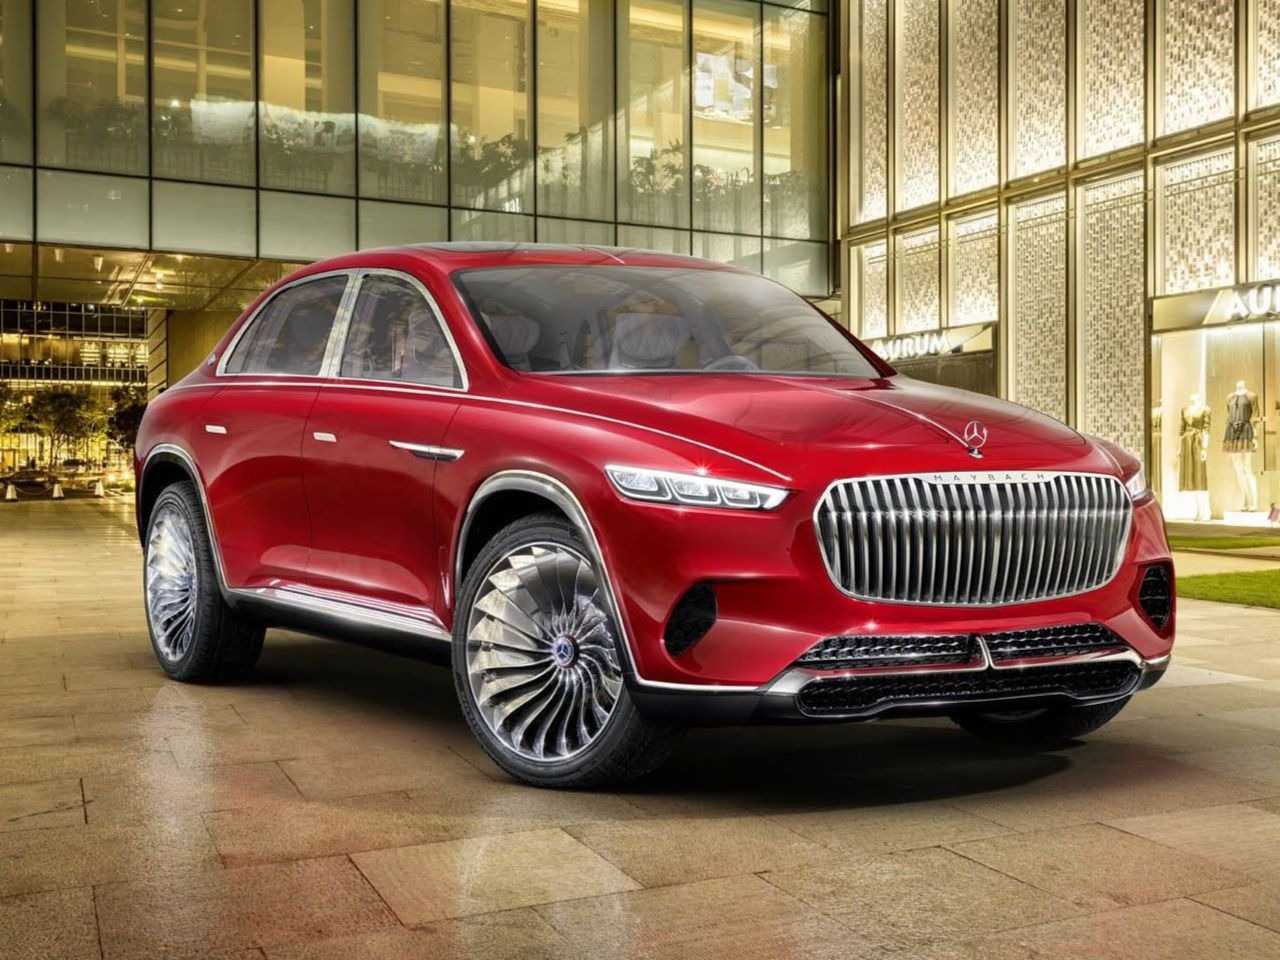 Mercedes-Maybach Vision Ultimate Luxury Concept